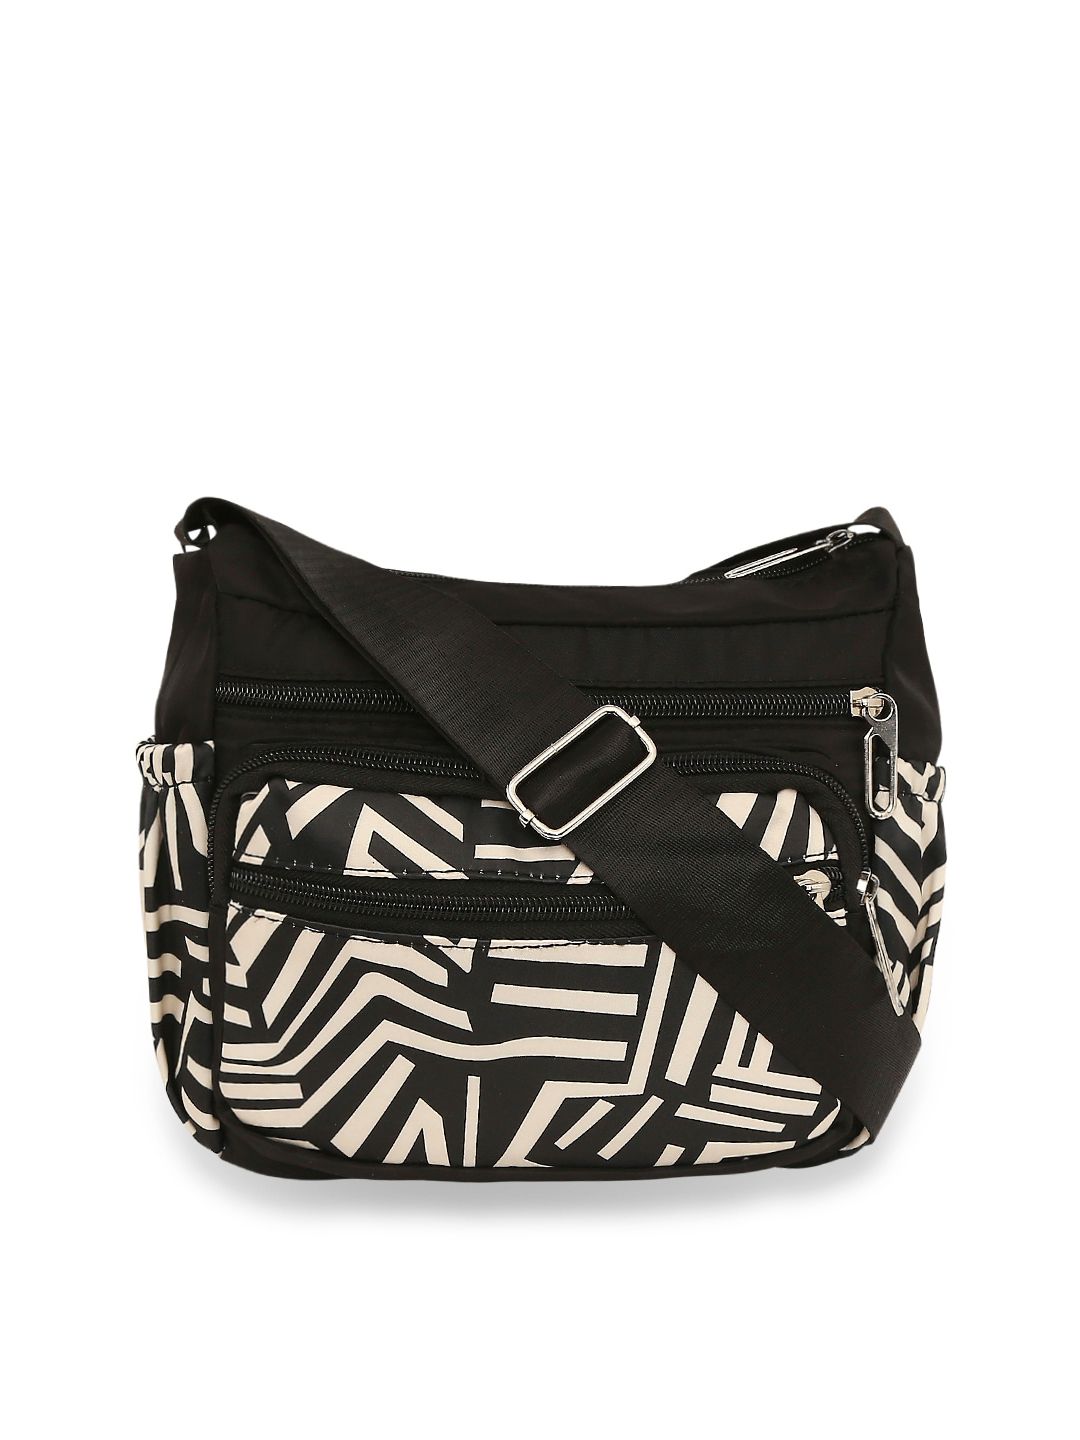 SATCHEL Multicoloured Geometric Printed Structured Sling Bag with Quilted Price in India